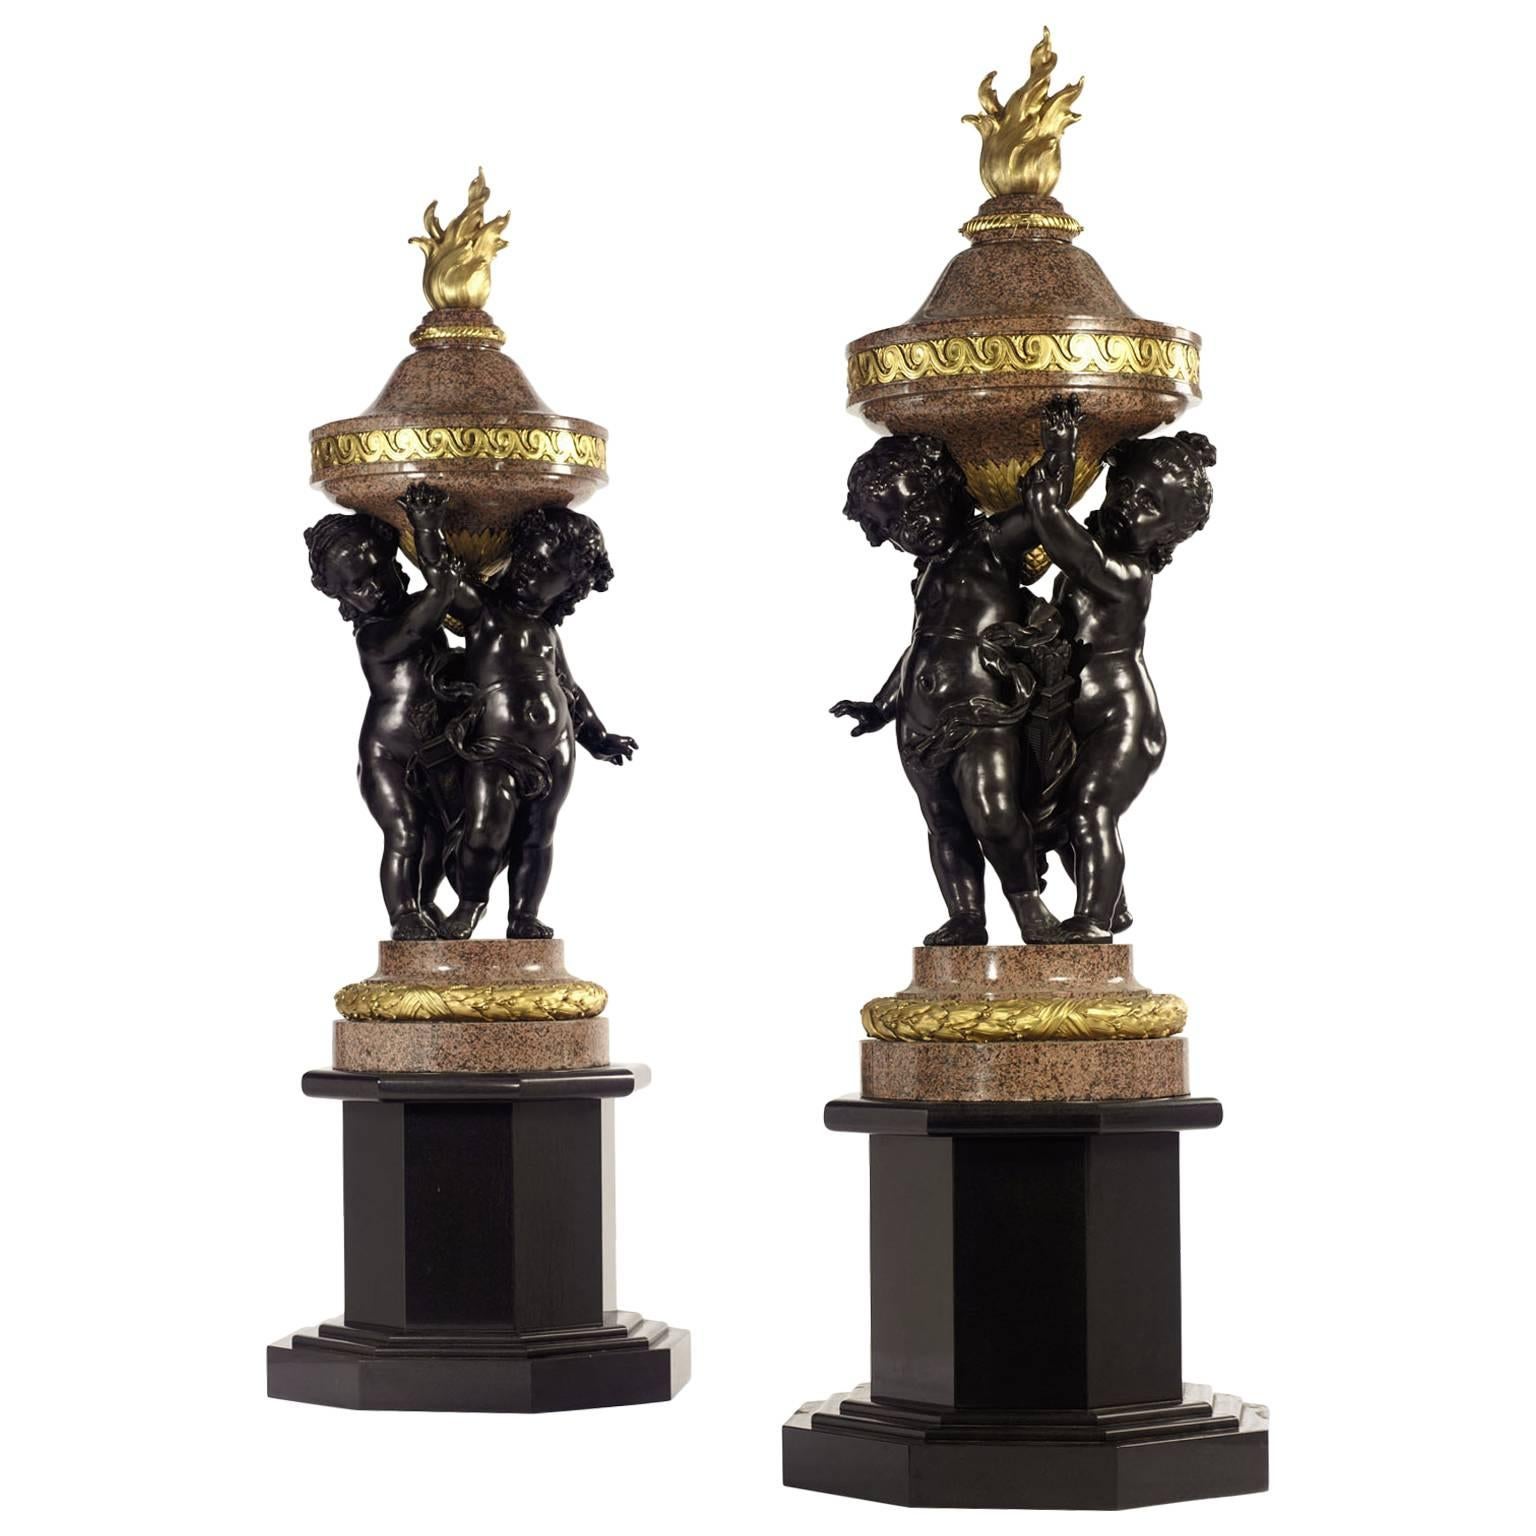 Monumental Pair of French 19th-20th Century Putto Flambeaux Urns Torcheres